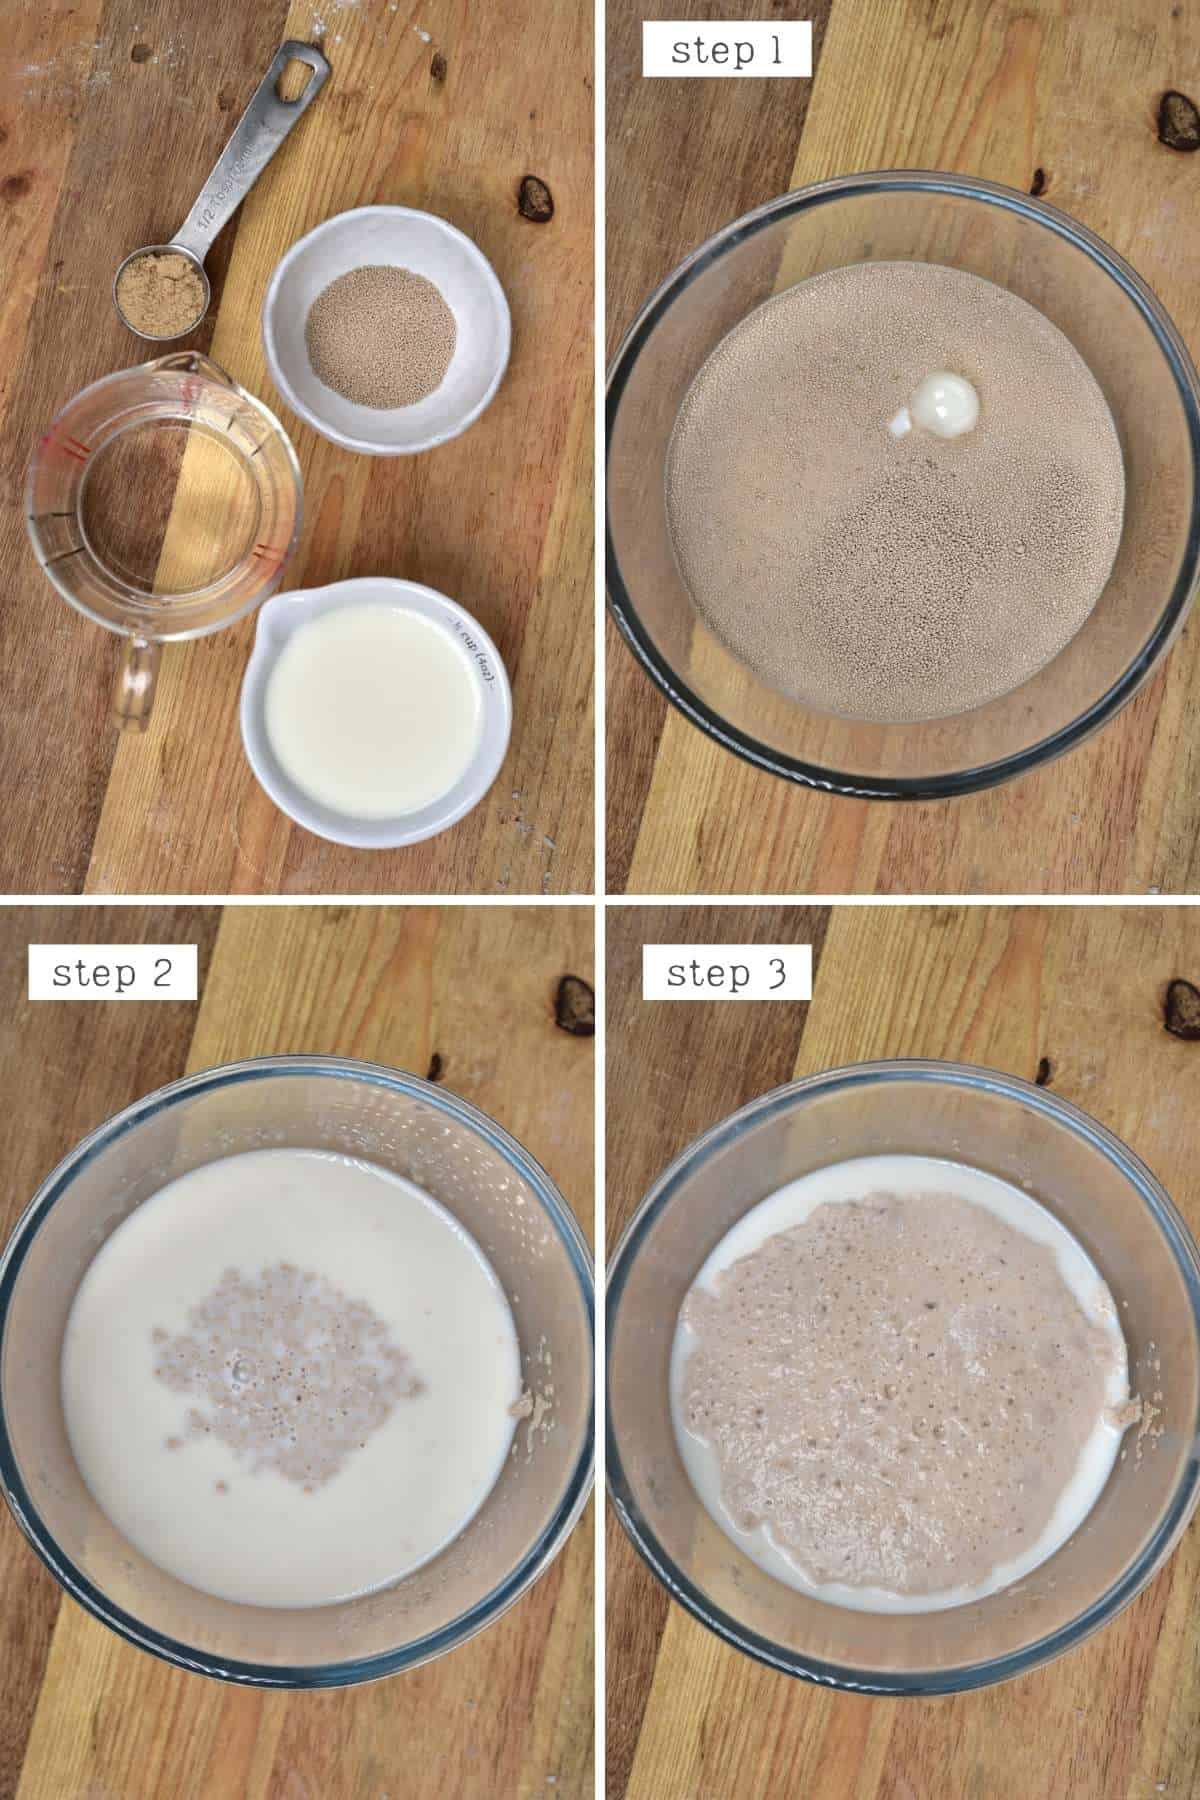 Steps for activating yeast in water and milk